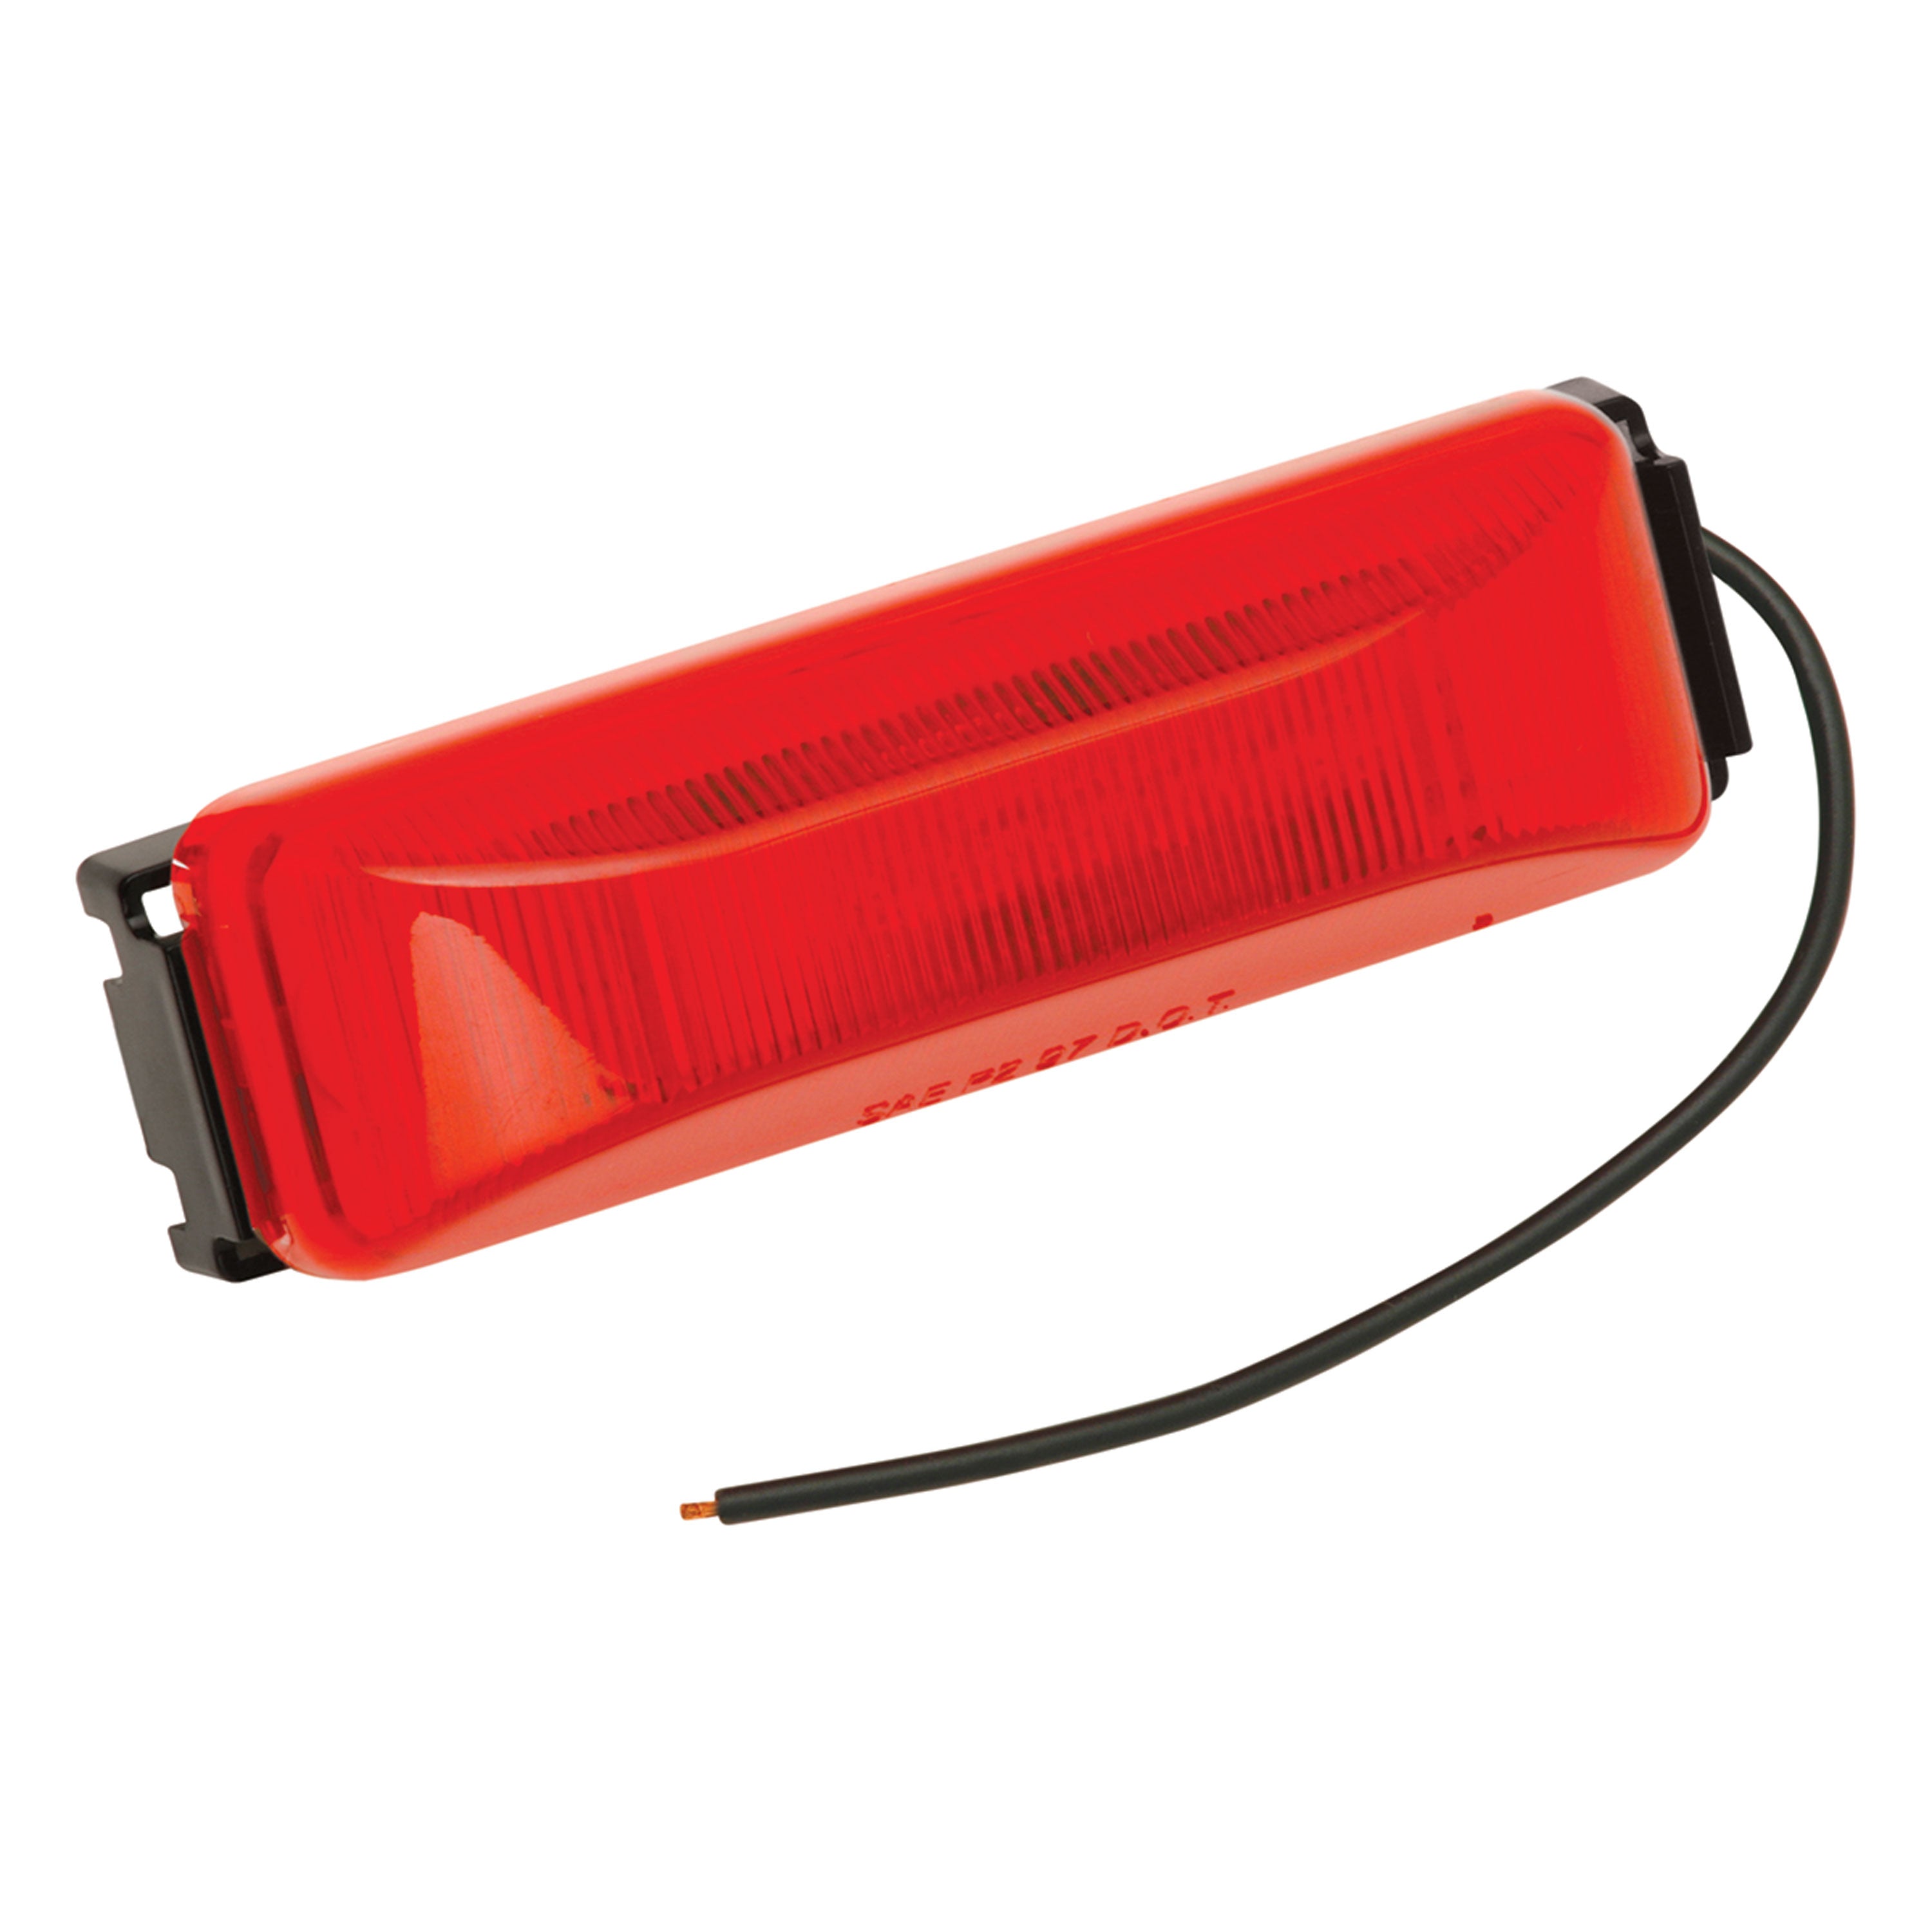 Bargman 42-38-033 Sealed LED Clearance Light #38 - Red